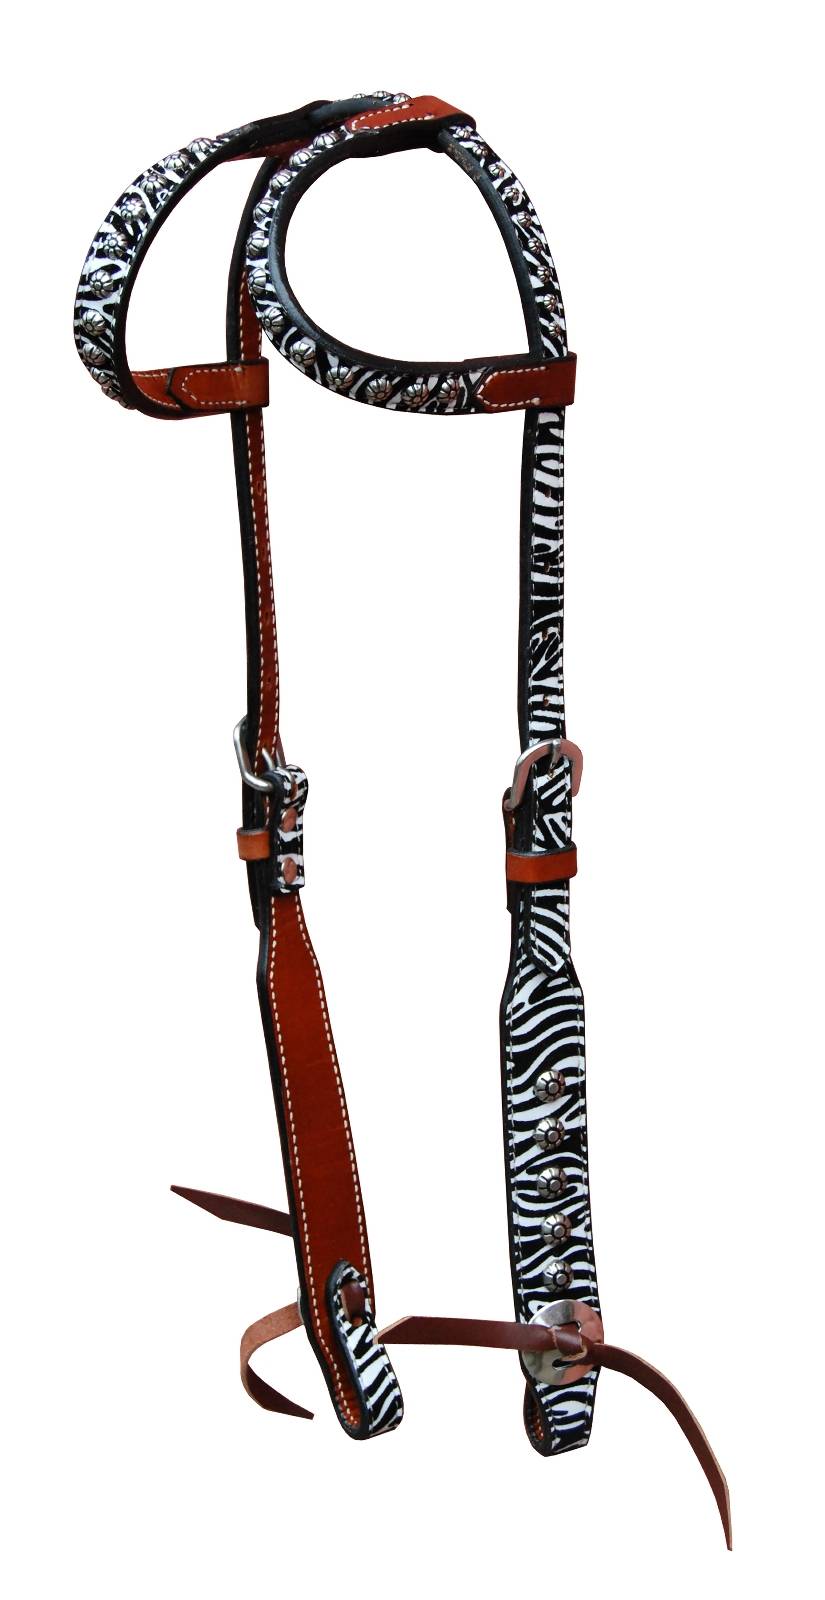 468858WHITEHRSE Turn-Two Double Ear Headstall - Chasing Wild sku 468858WHITEHRSE